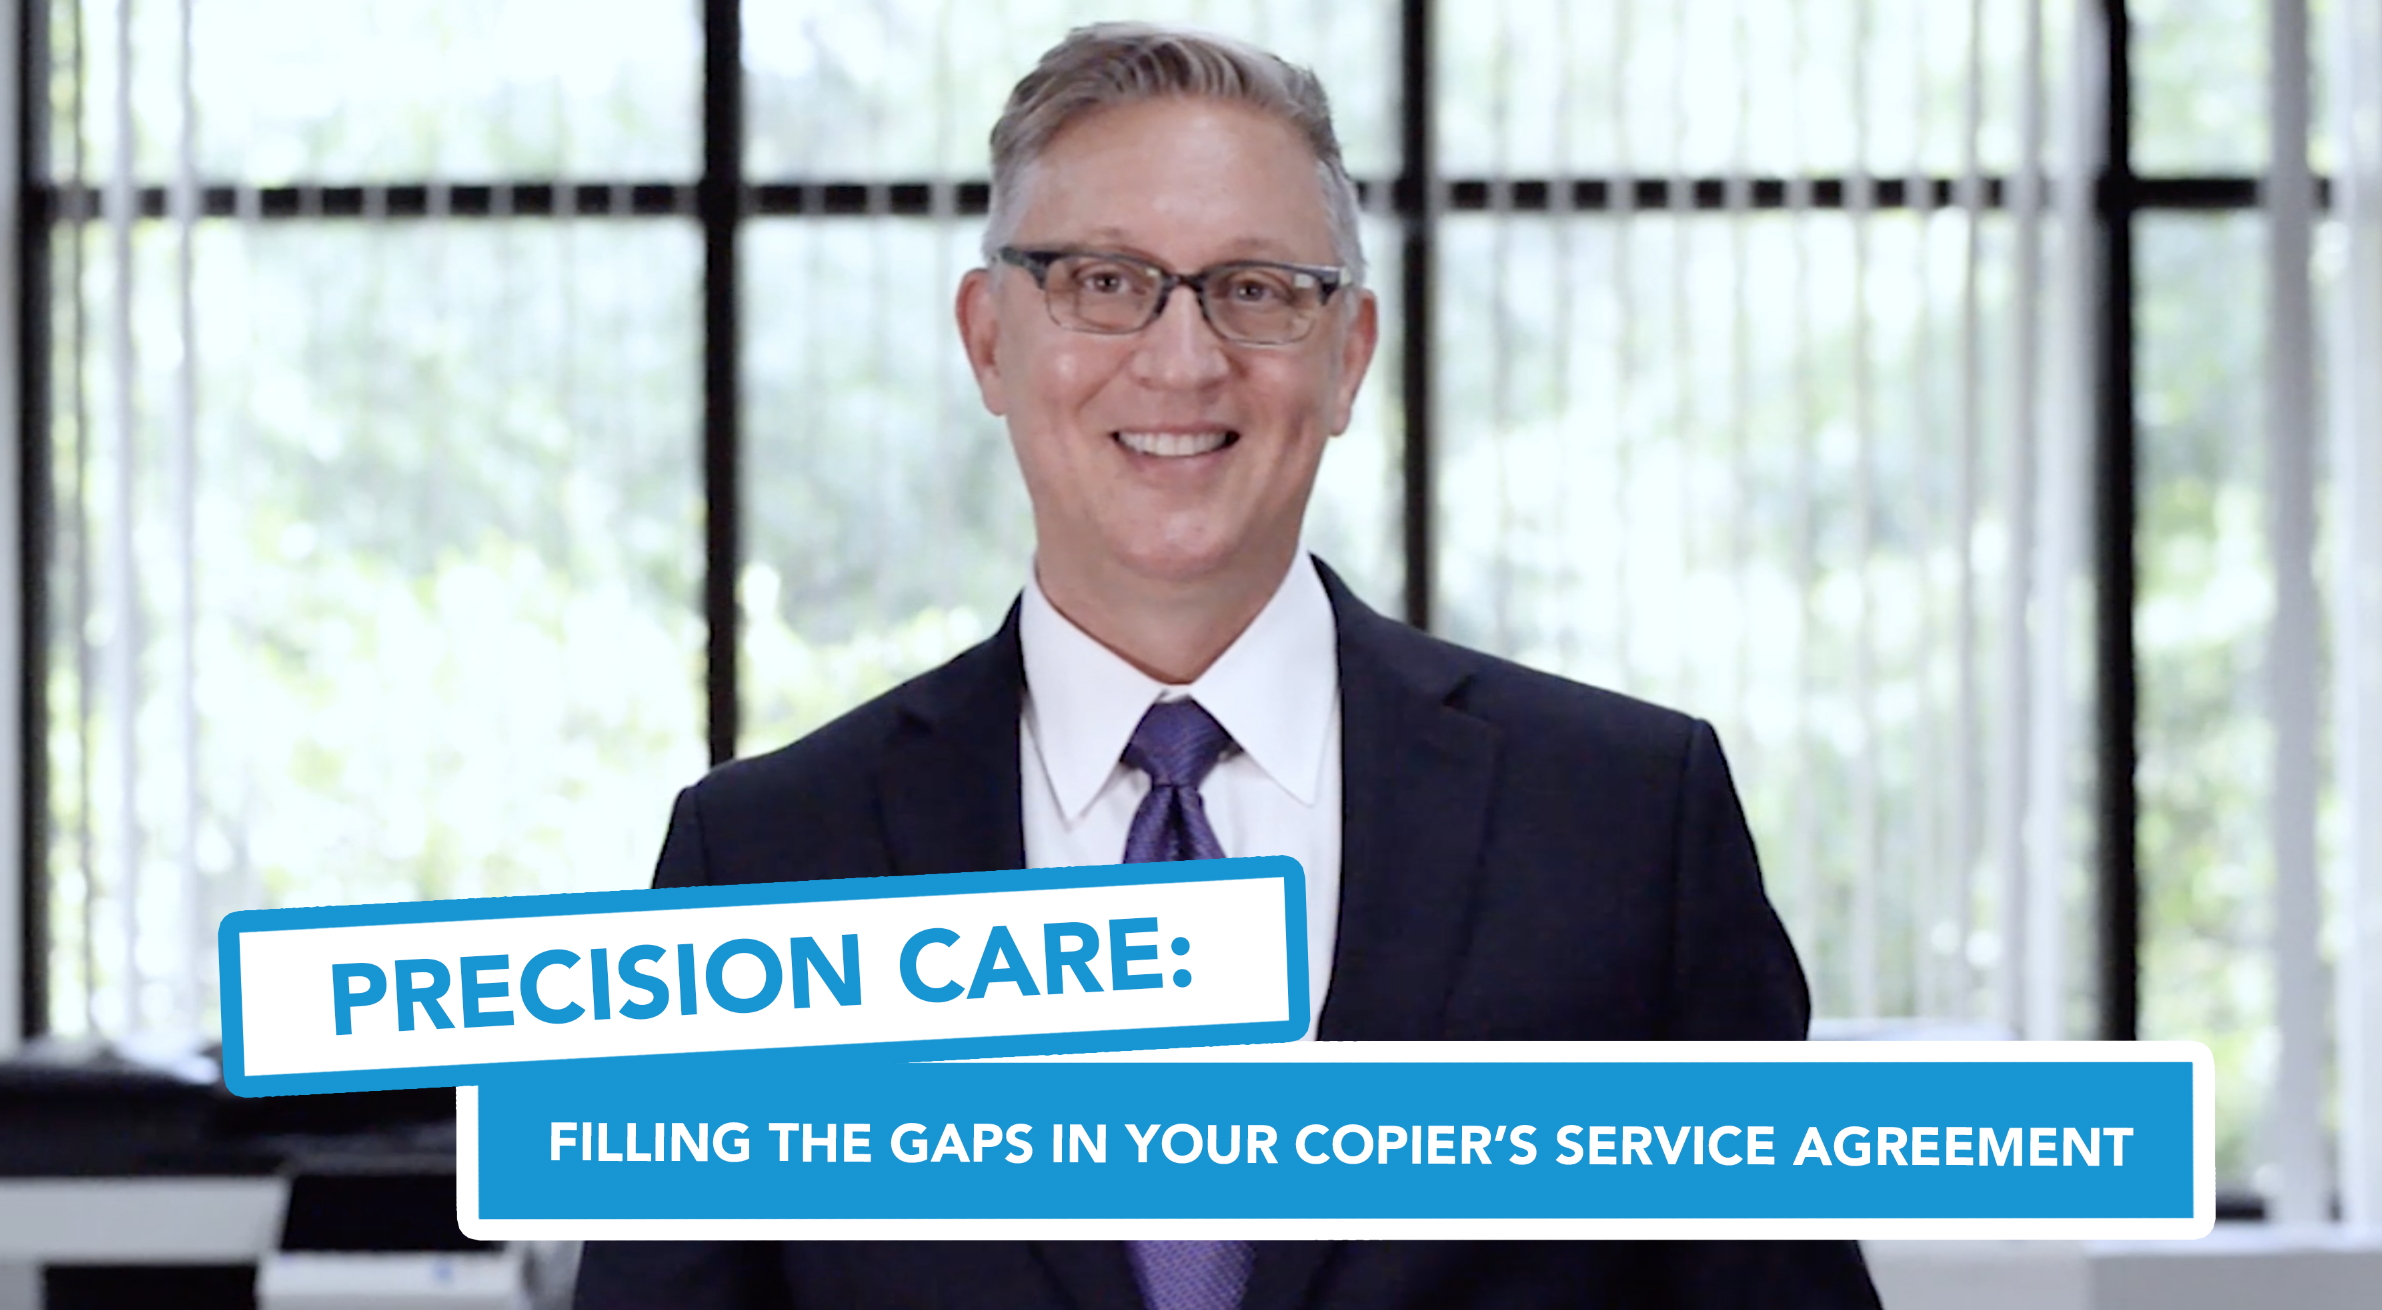 Precision Care: Filling the Gaps in Your Copier’s Service Agreement